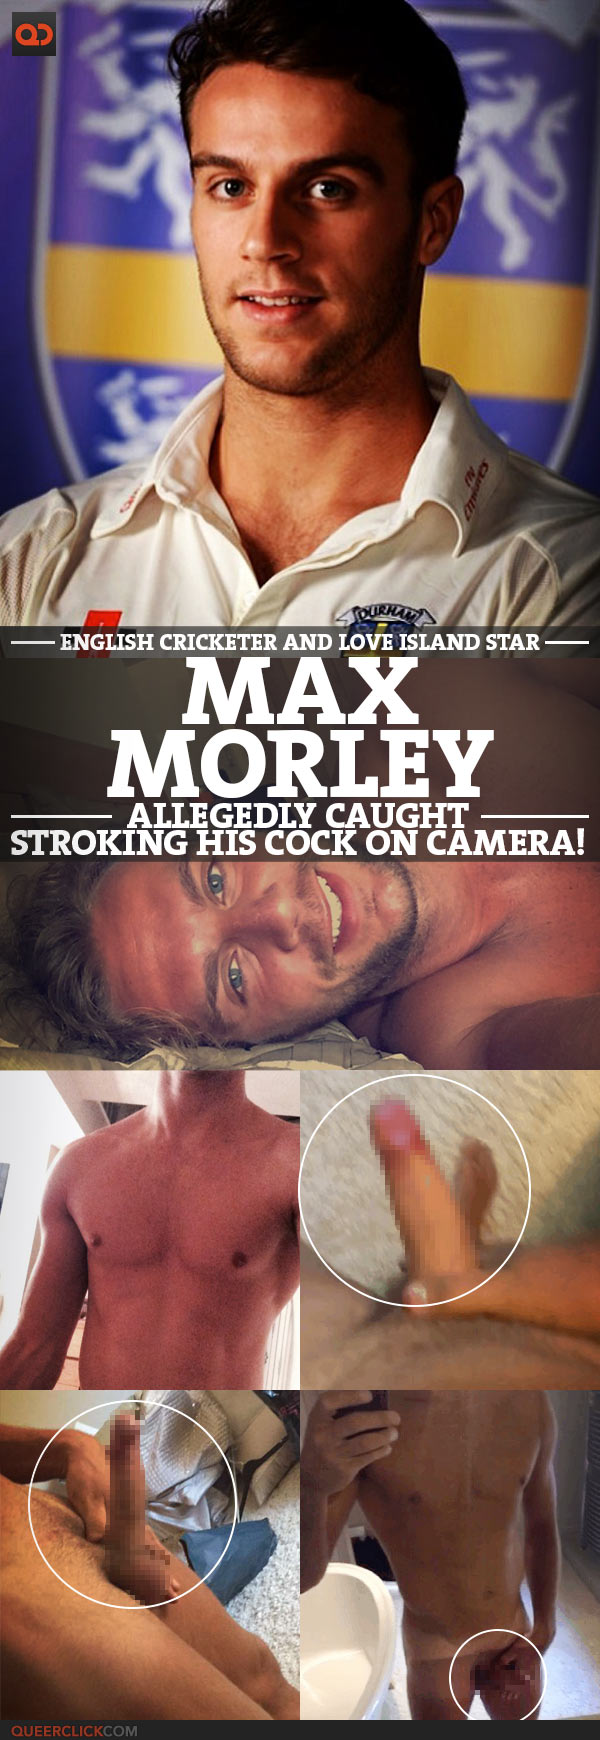 Max Morley, English Cricketer And Love Island Star, Allegedly Caught Stroking His Cock On Camera!